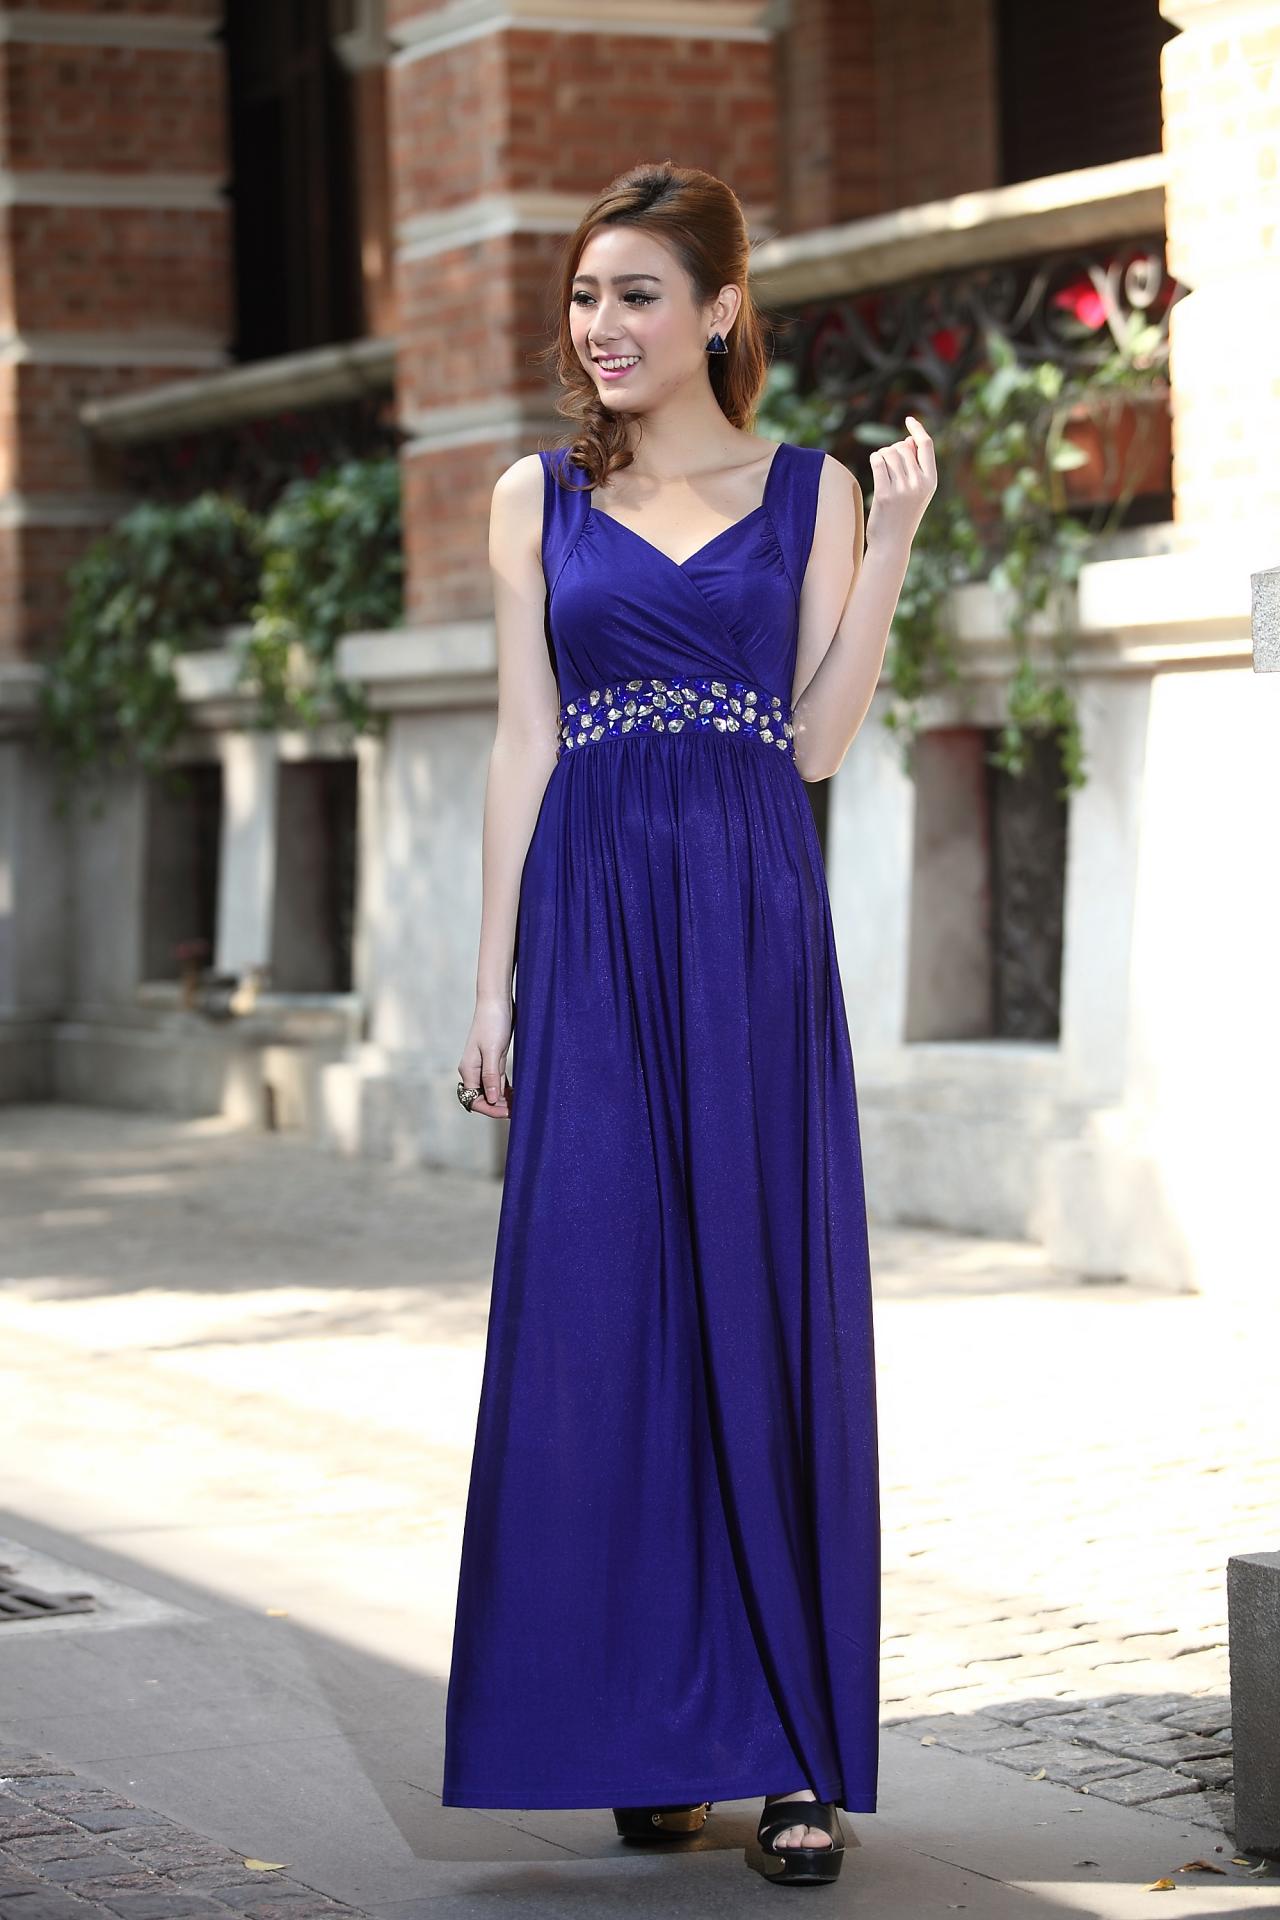 Royal Blue Formal Cocktail Bead Prom Party Evening Maxi Dress Bridesmaid Gown Plus Sizes Bridesmaids Evening Cocktail Dress Ball Gowns